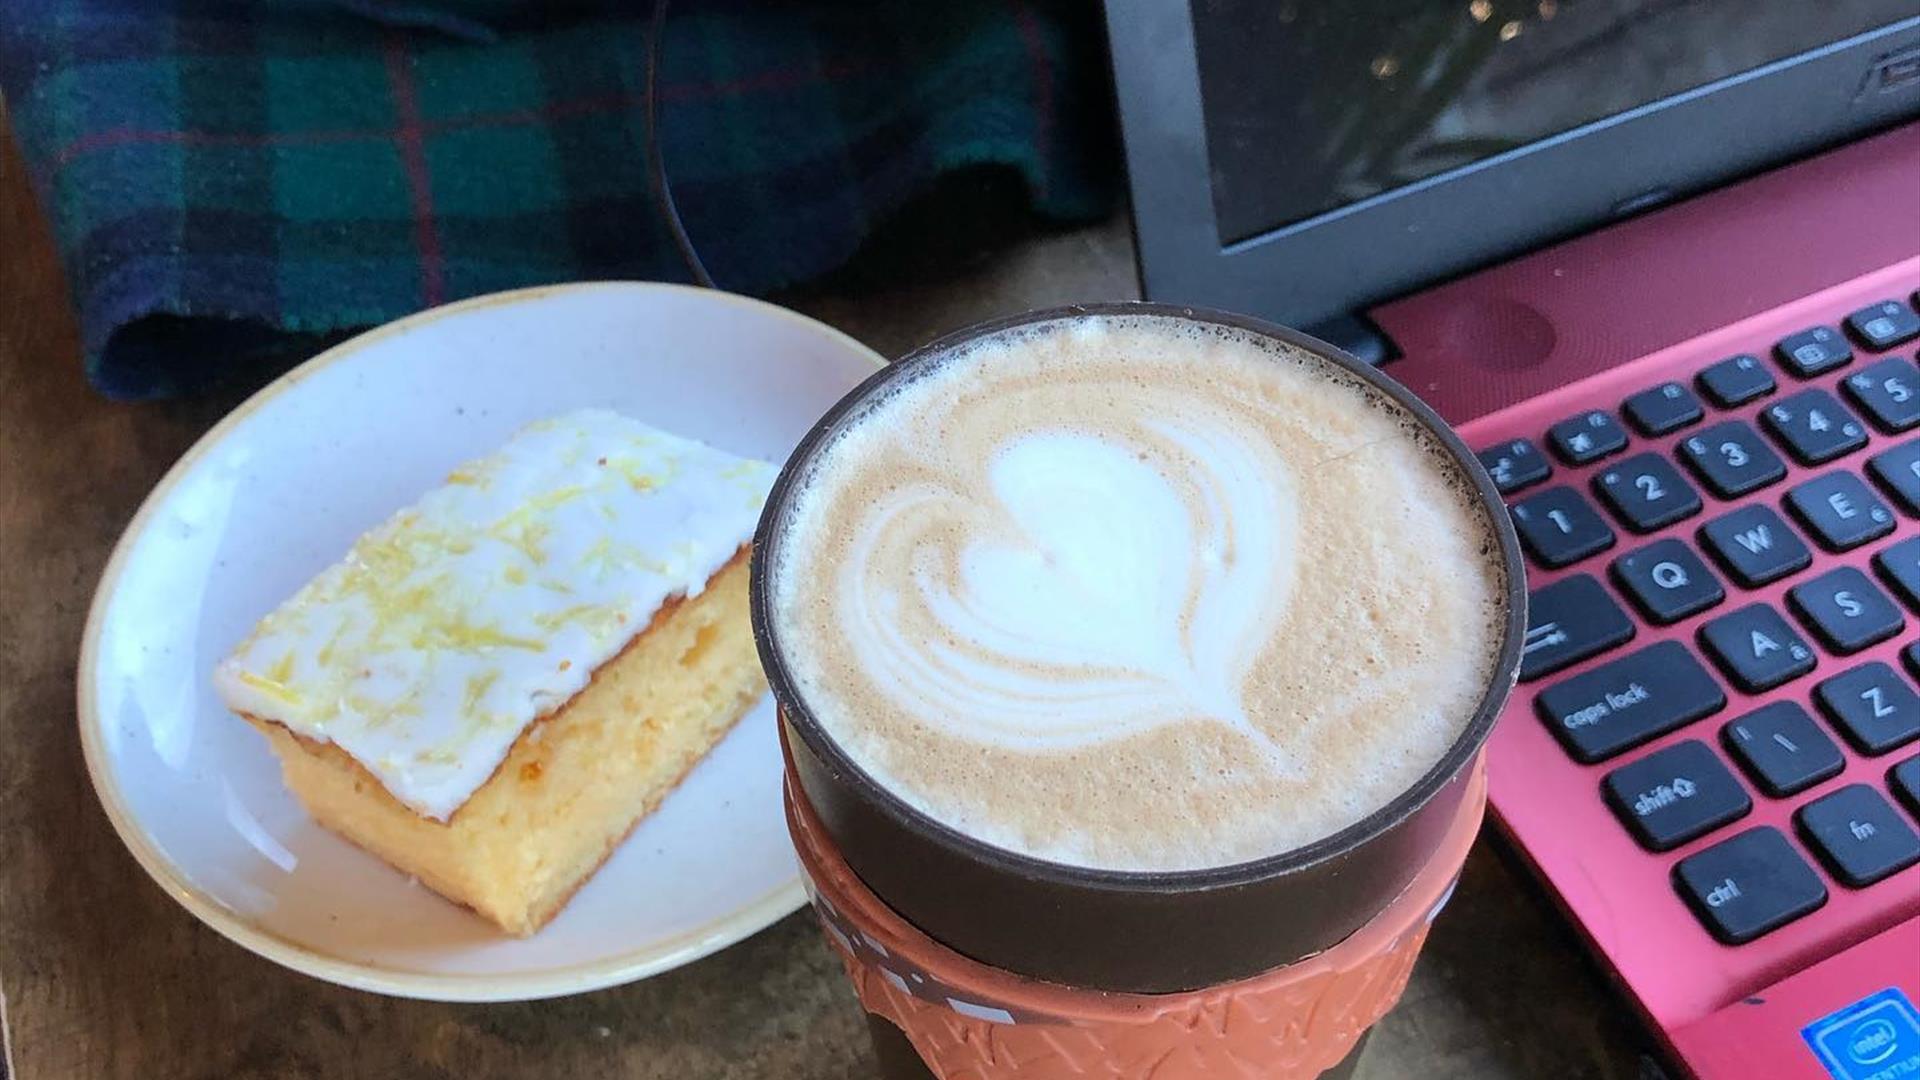 Image is of a cup of coffee and slice of cake in Ground Espresso